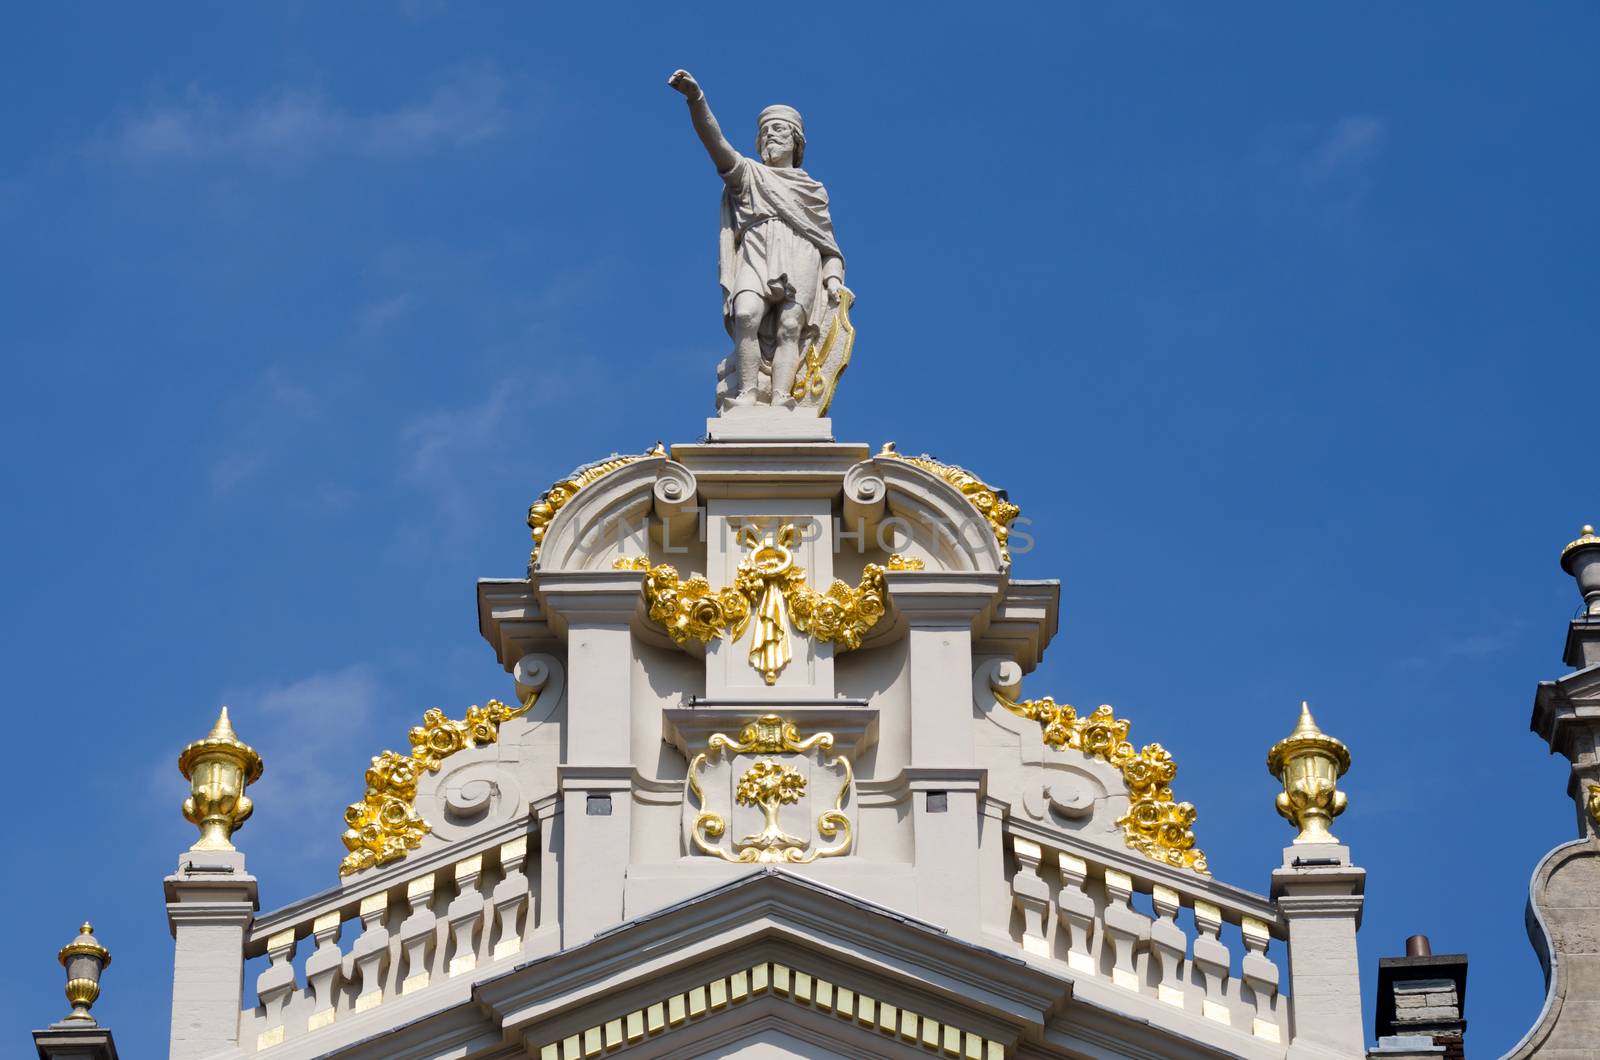 Ornate on the top of buildings in Grand Place, Brussels, Belgium